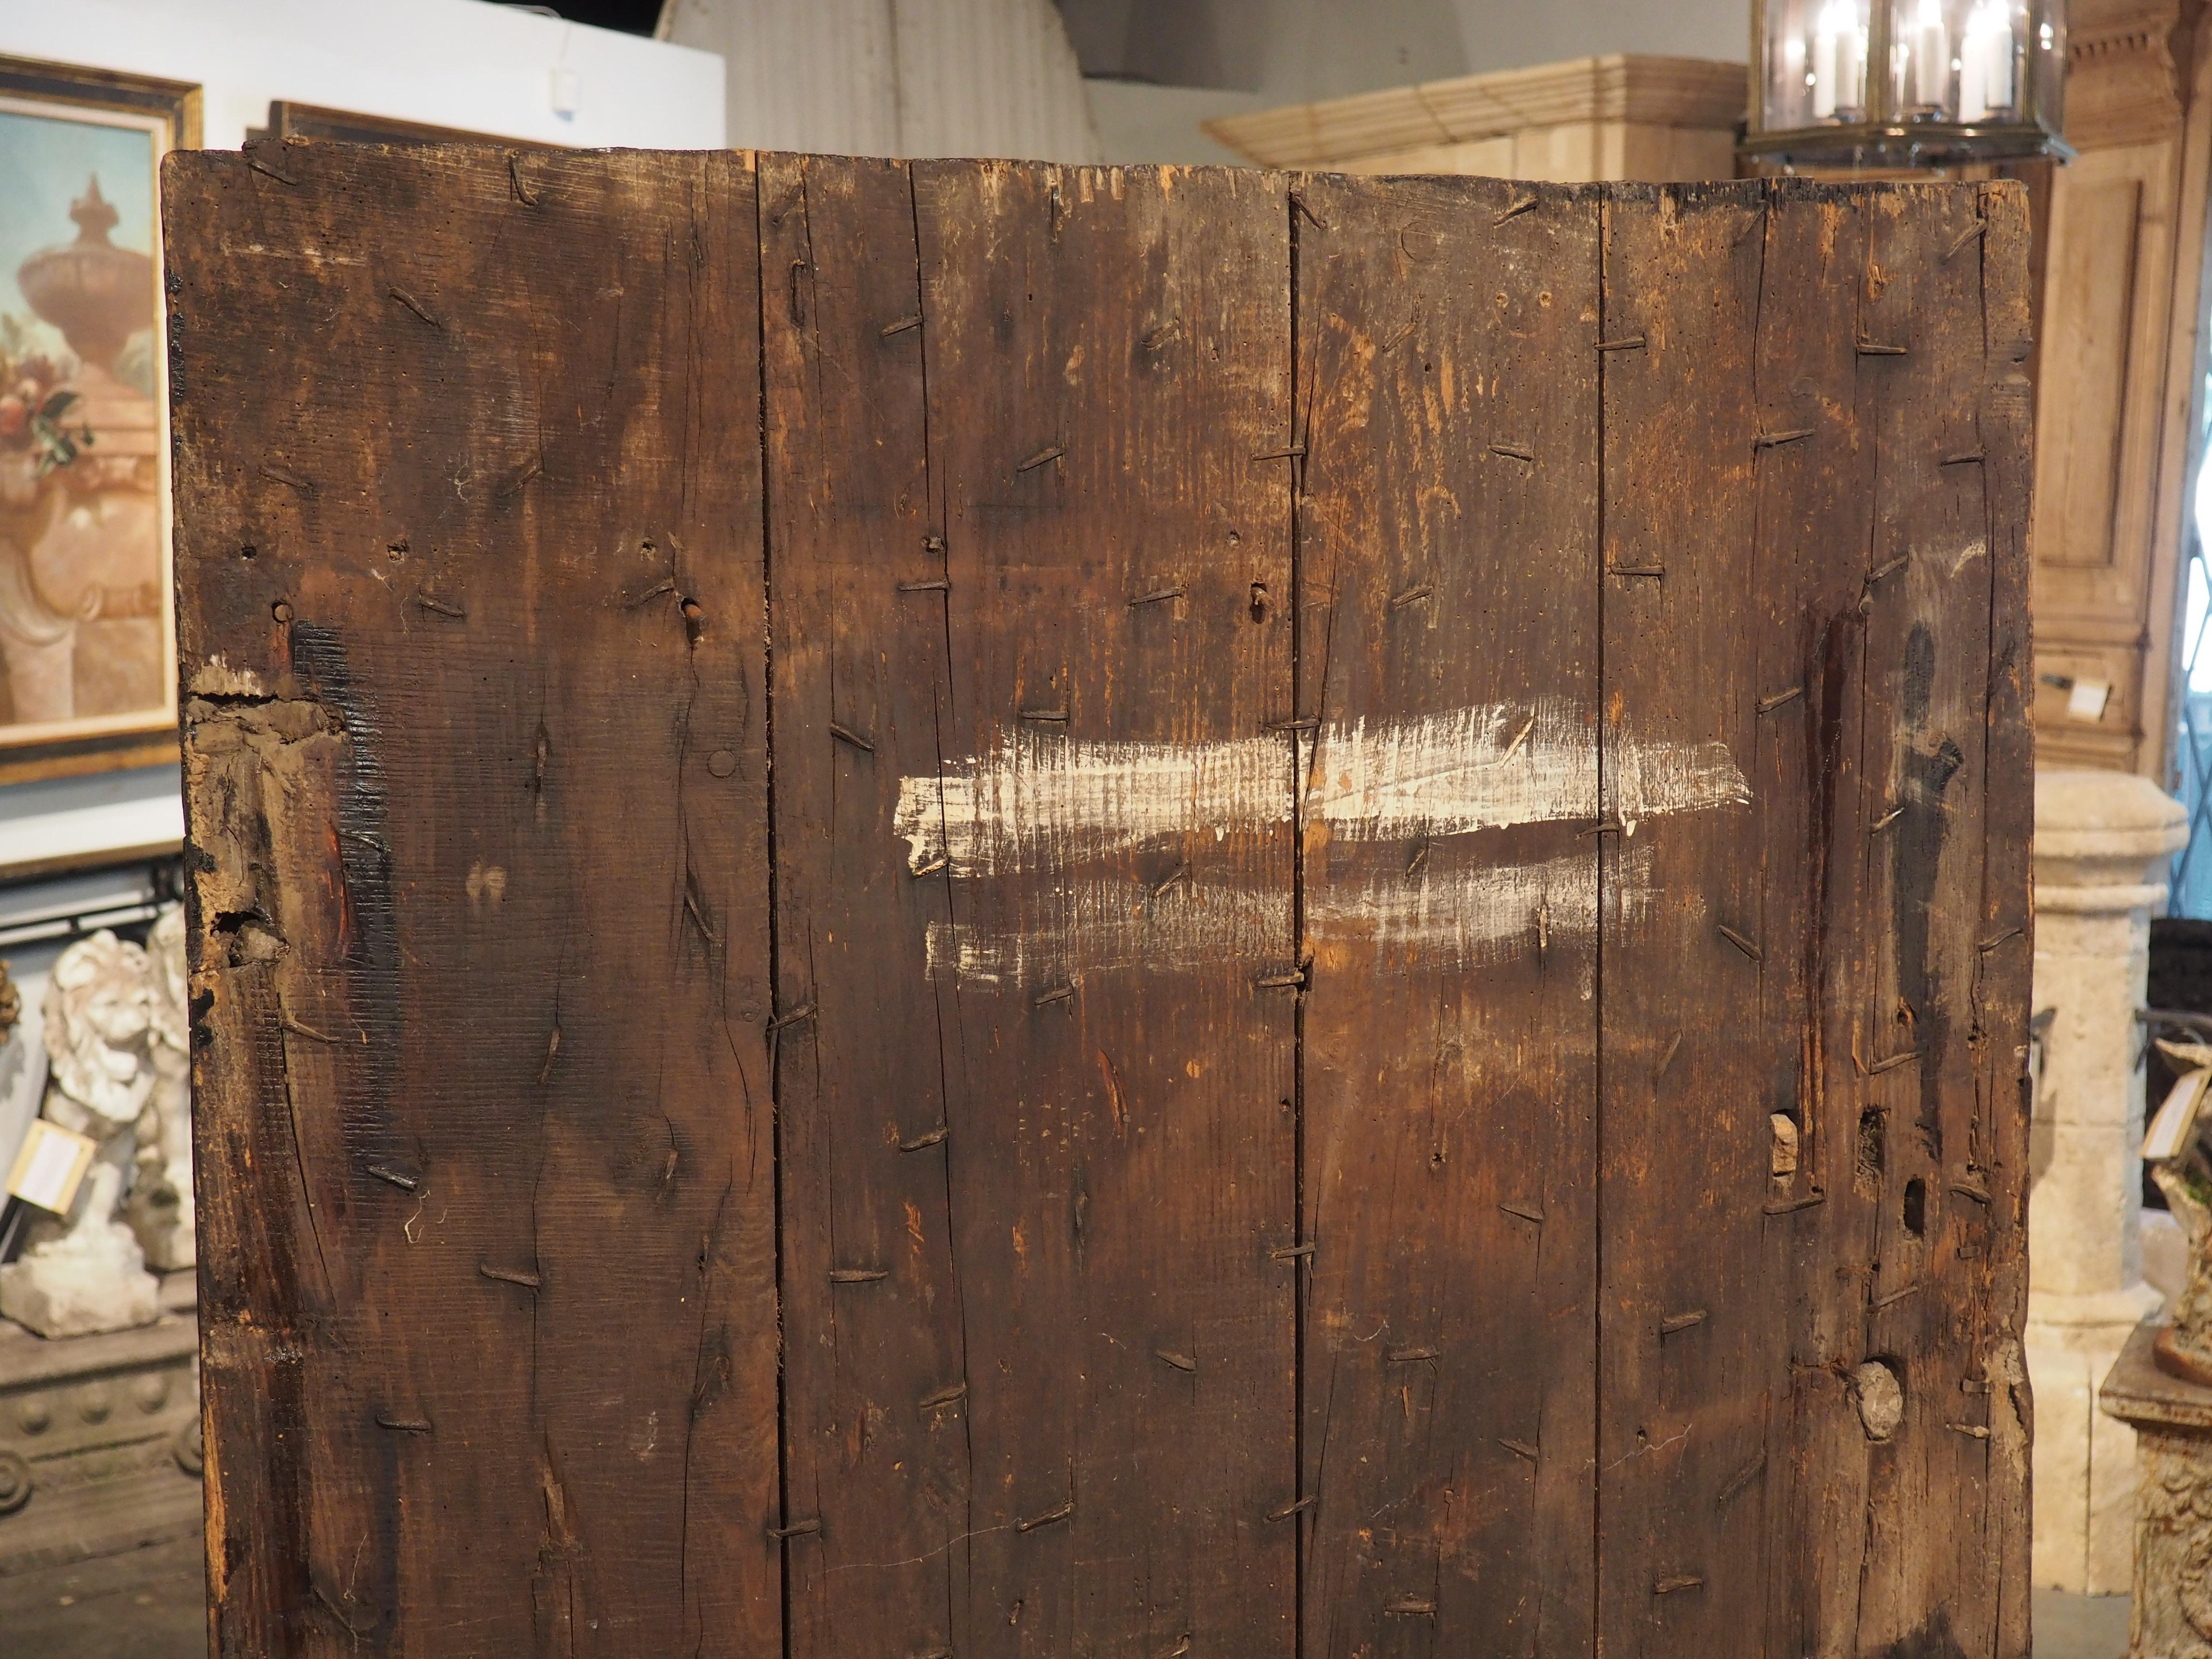 Possibly inspired by earlier Spanish doors, this studded farm door was hand-carved in France in the 1700’s. The 64 ½ inch tall door has iron nailheads of various sizes hammered into the front of the door, arranged in linear rows. Spanish furniture